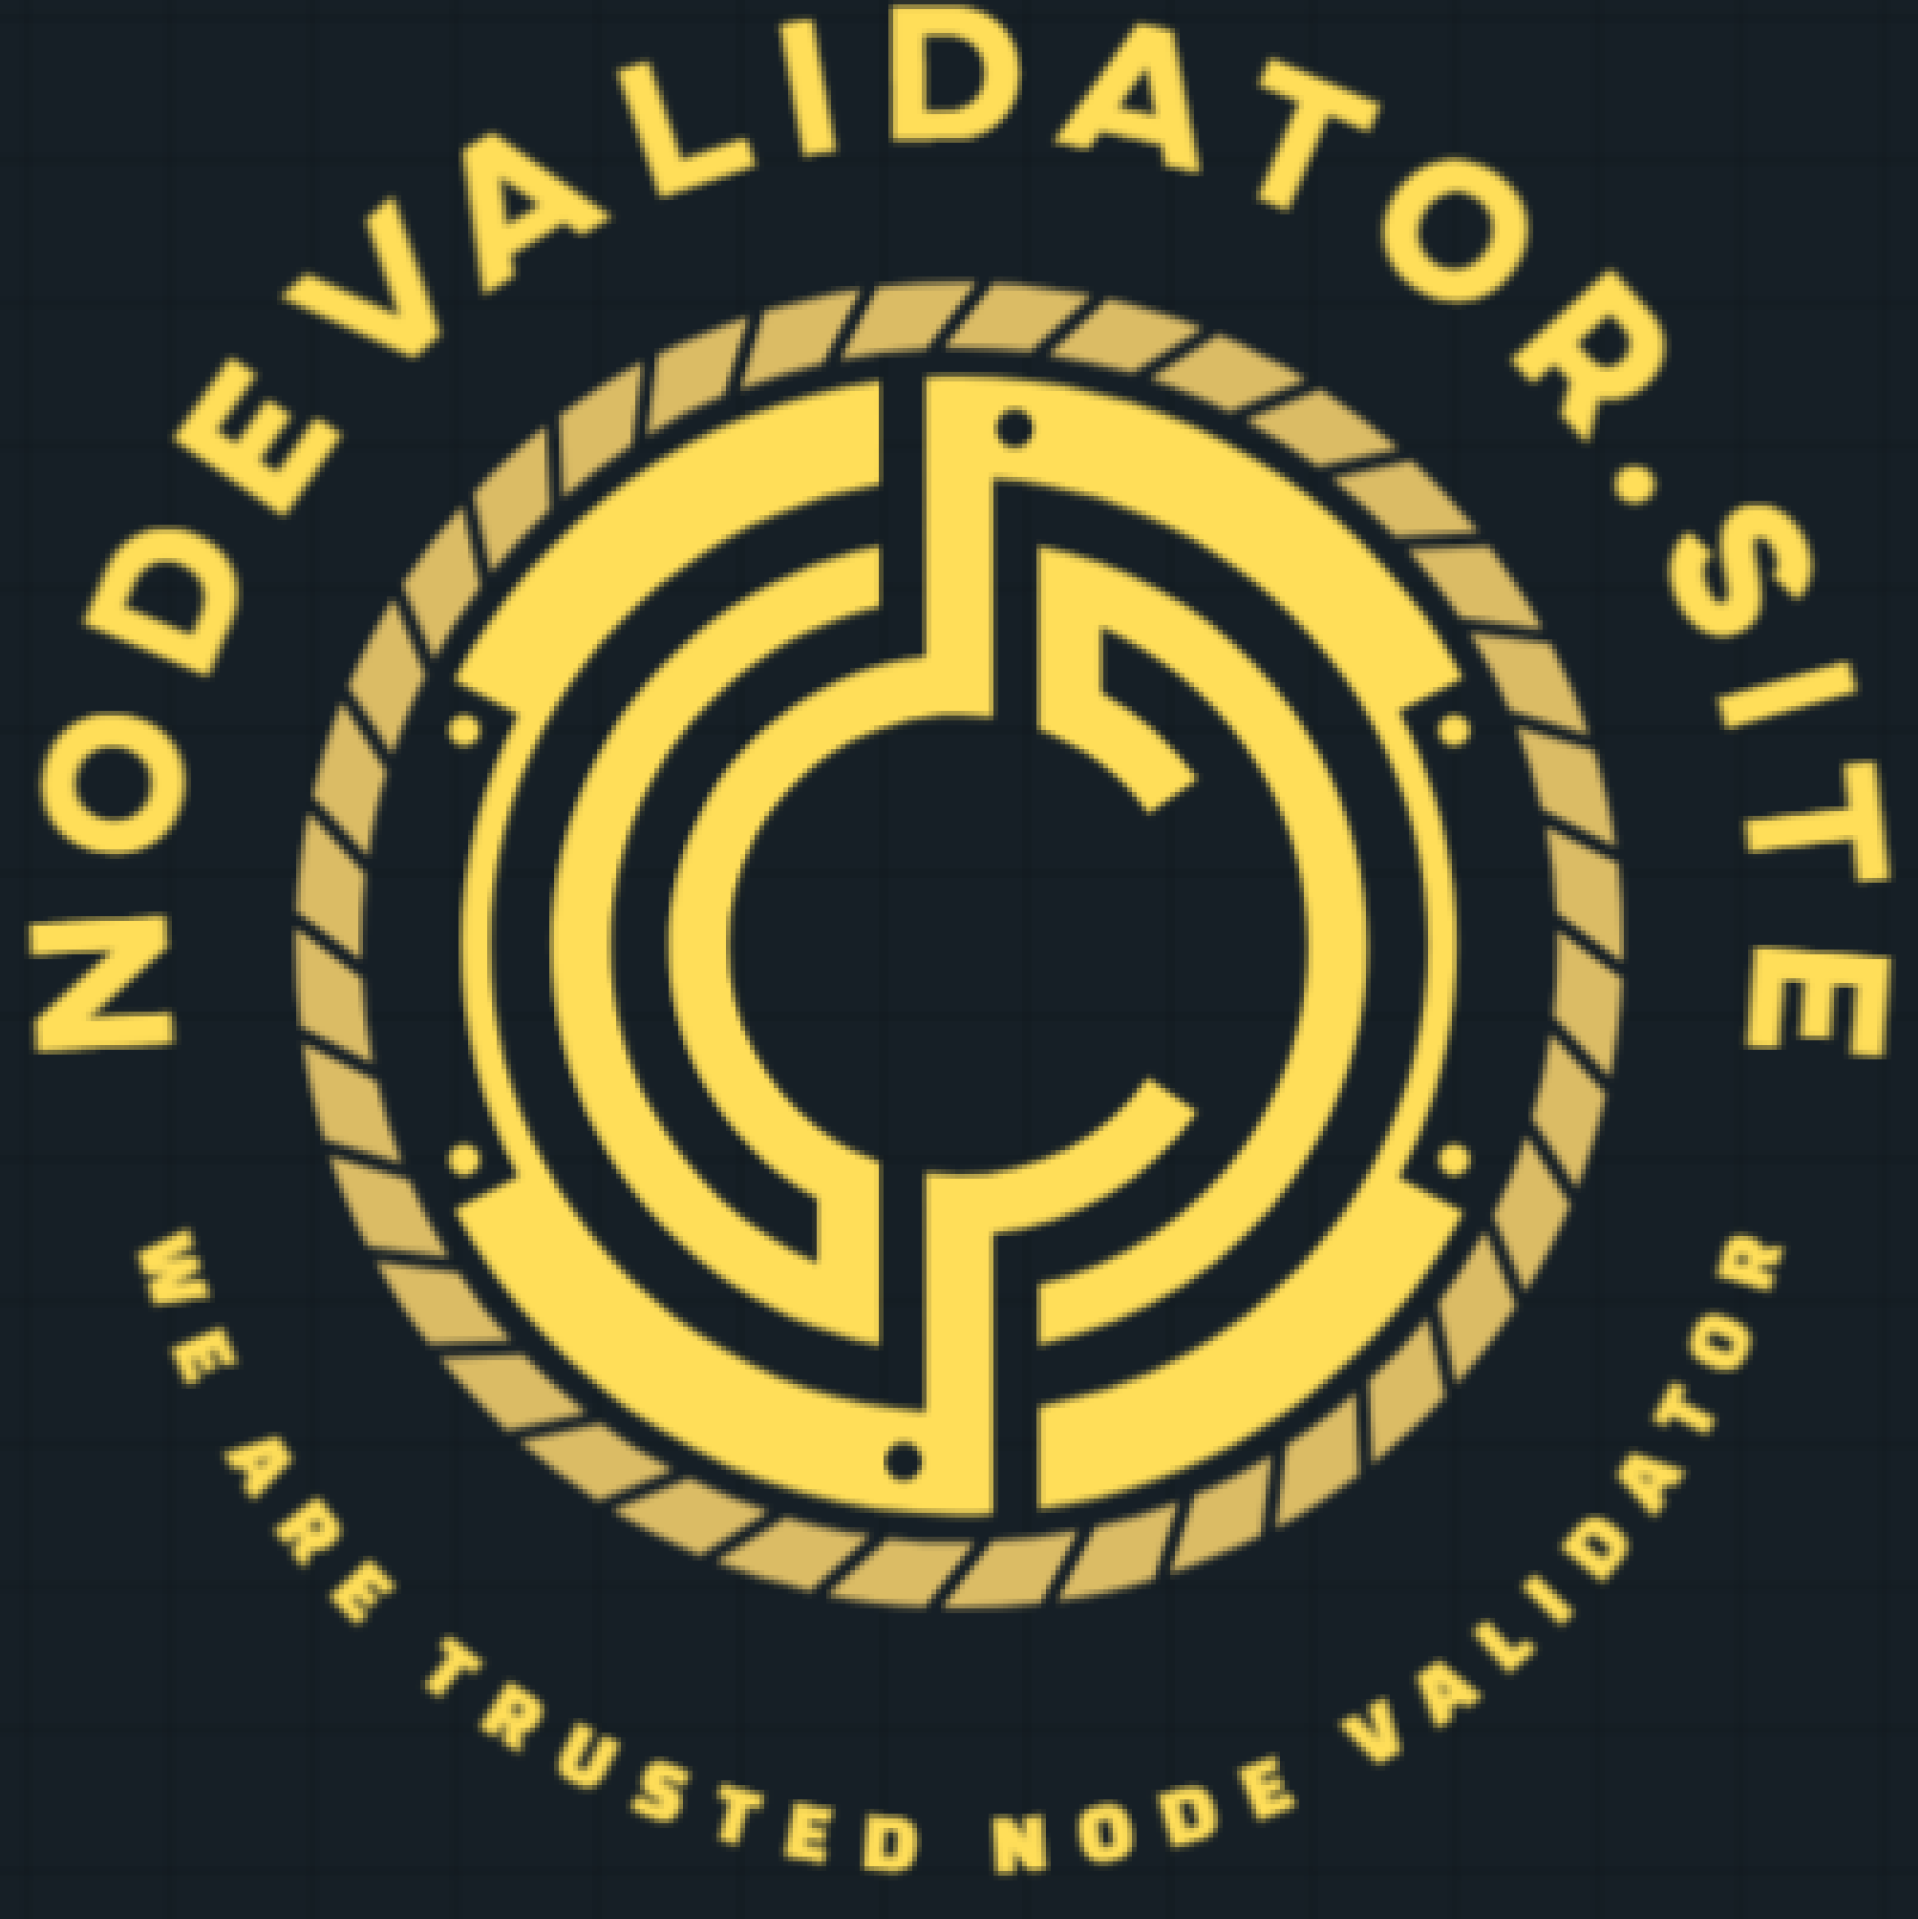 We are trusted node validator